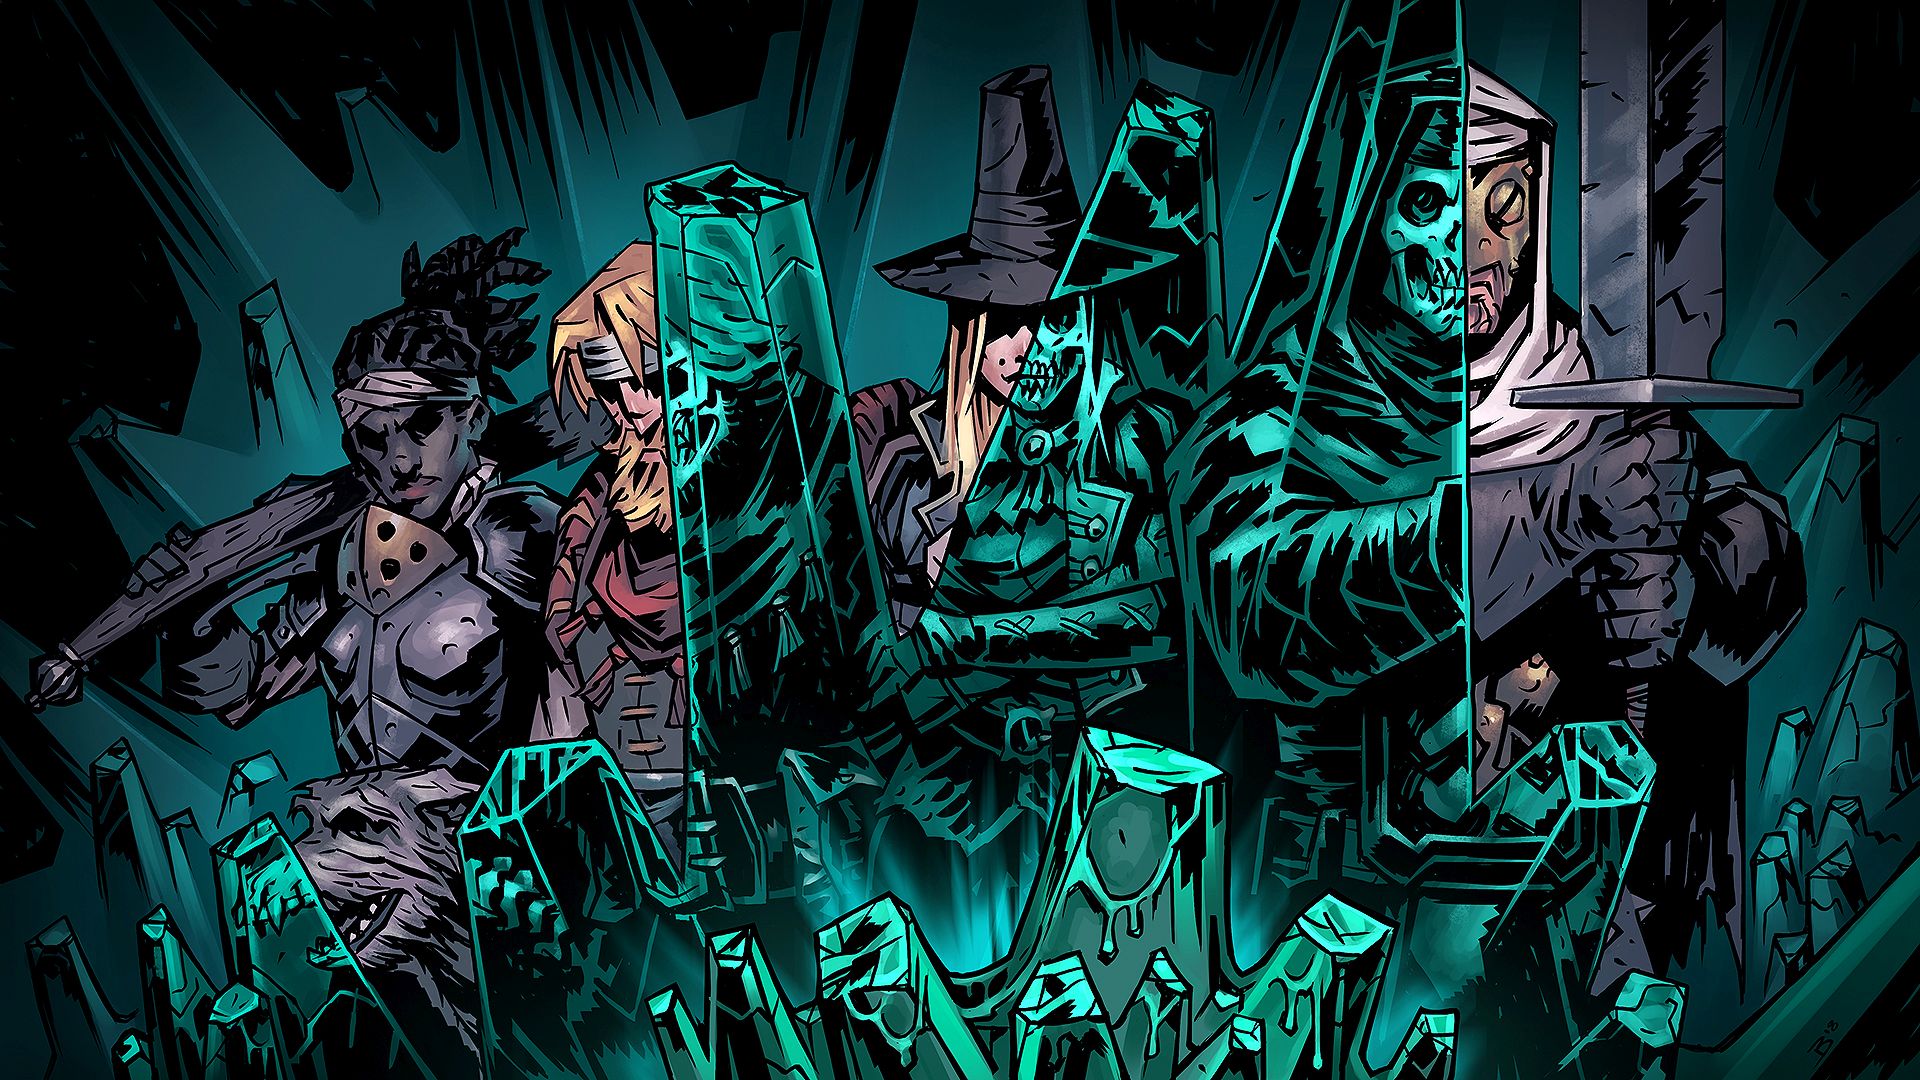 Darkest Dungeon The Color of Madness